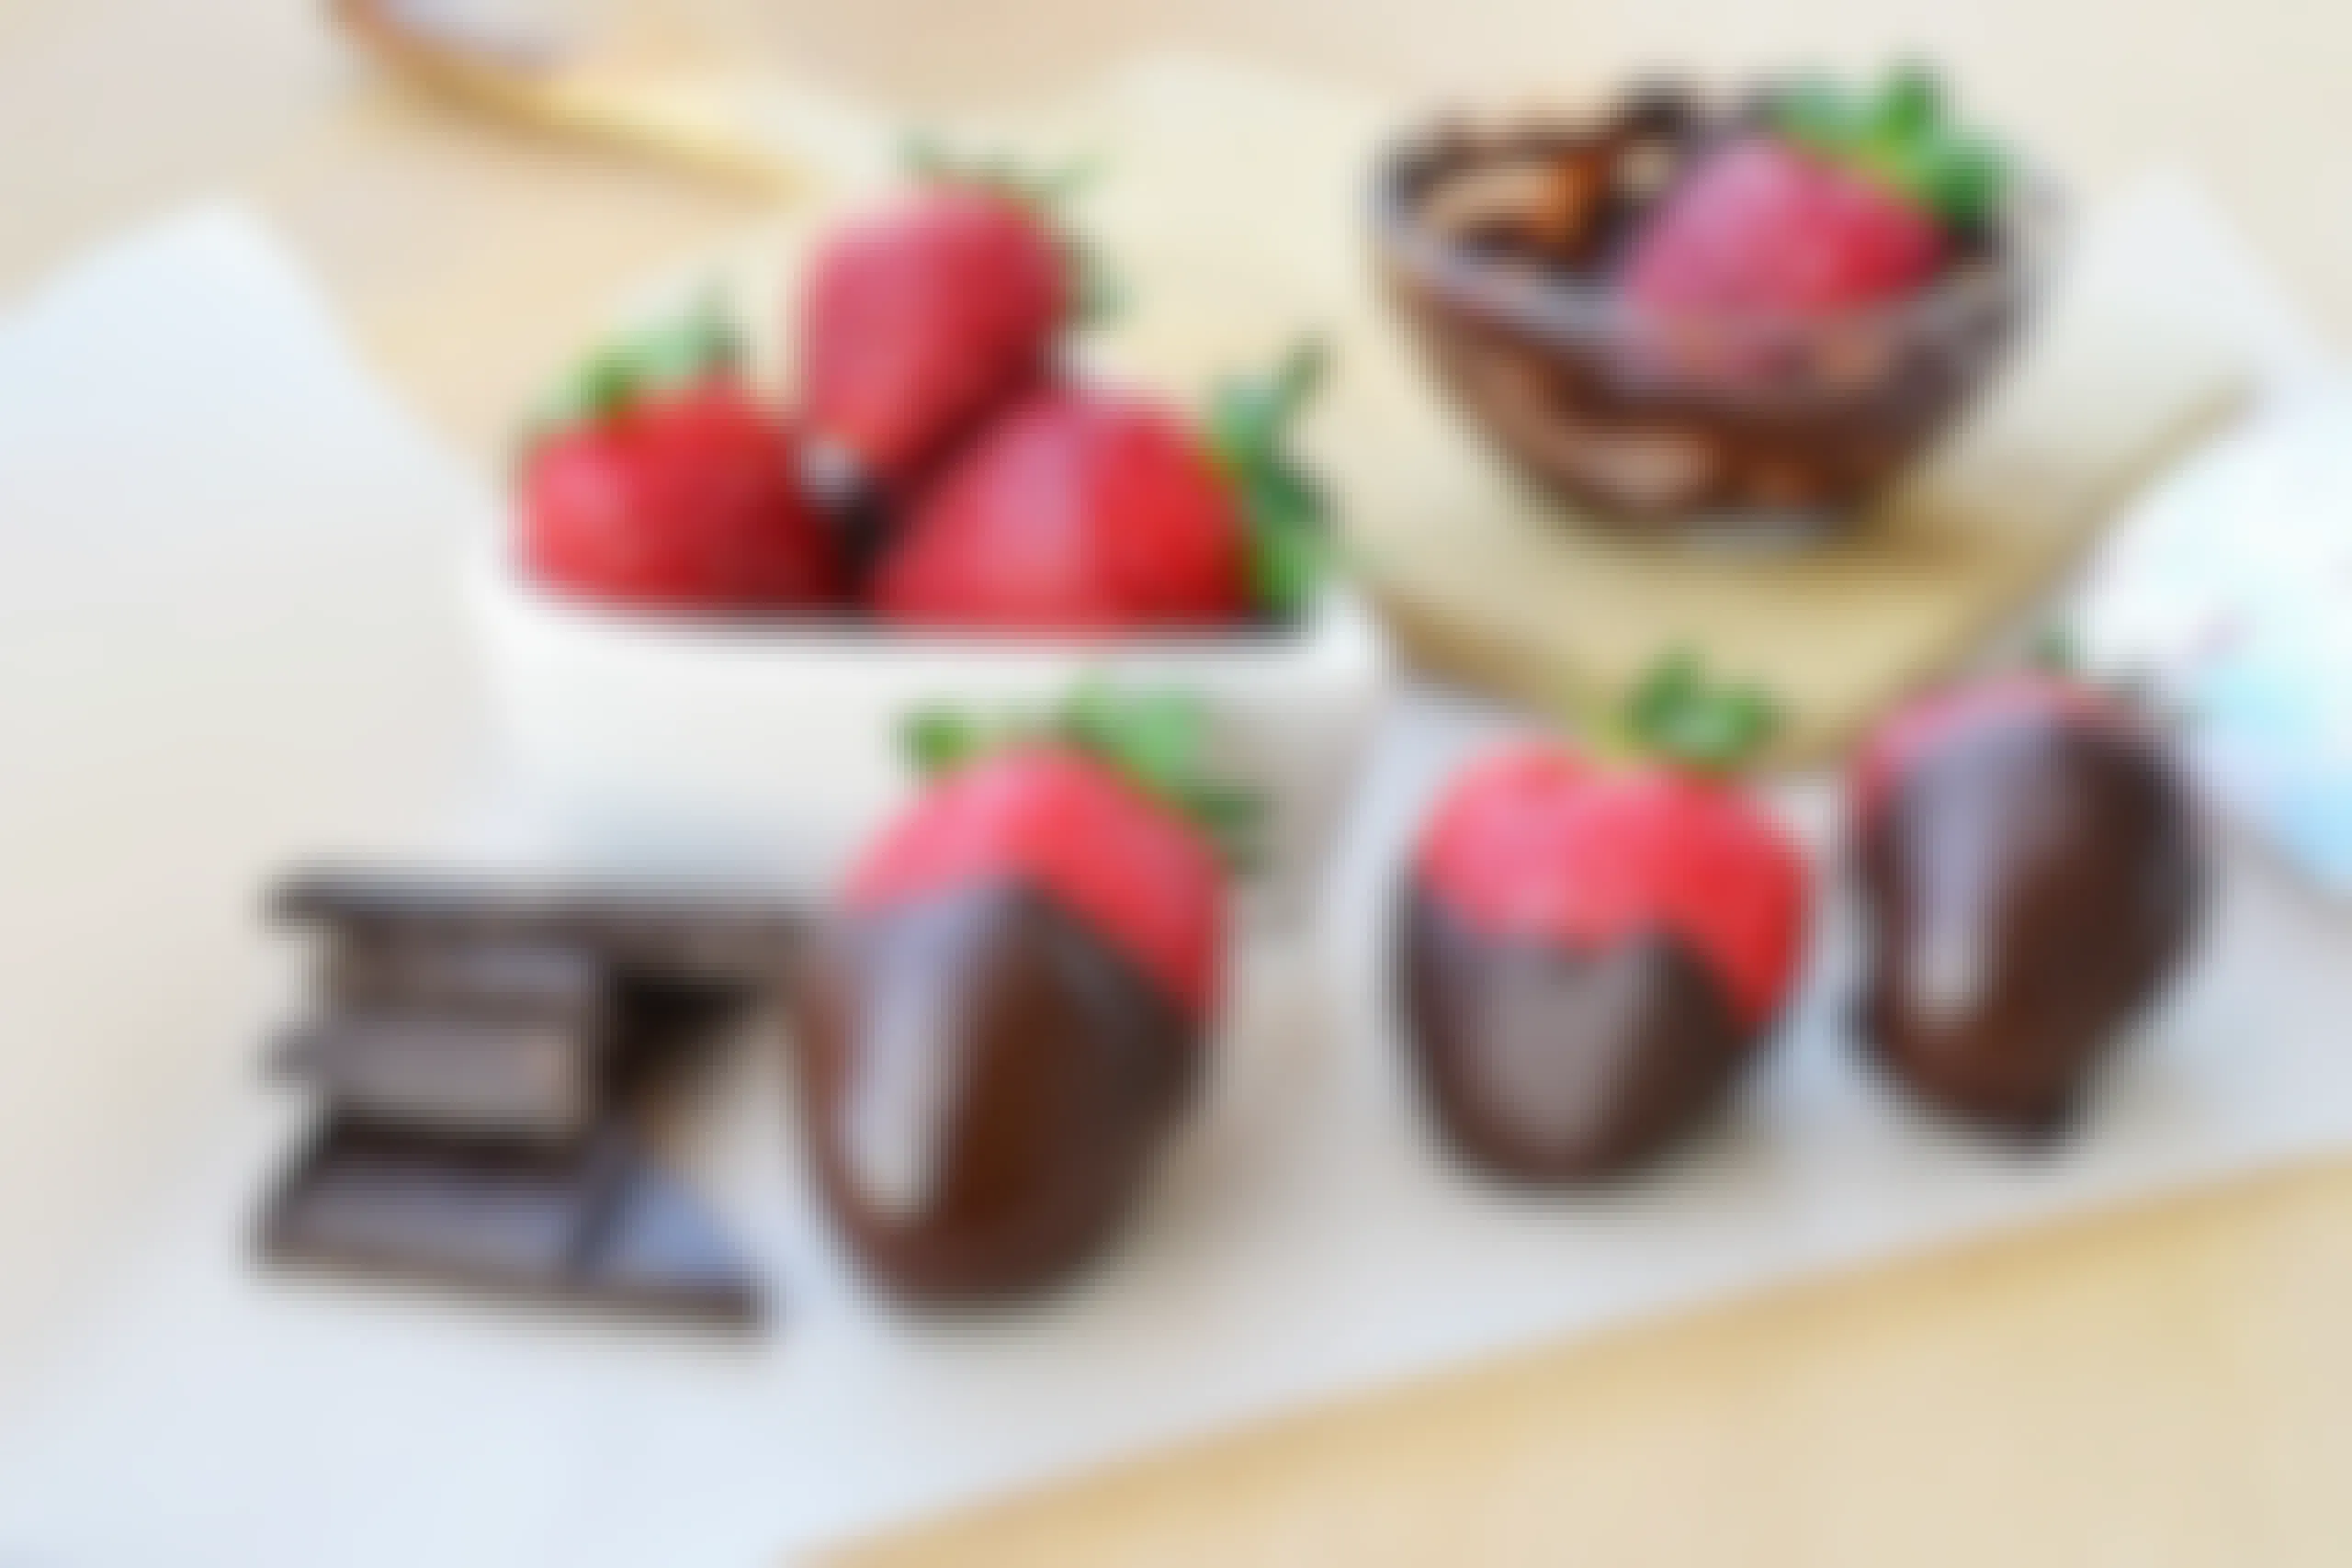 Some chocolate dipped strawberries